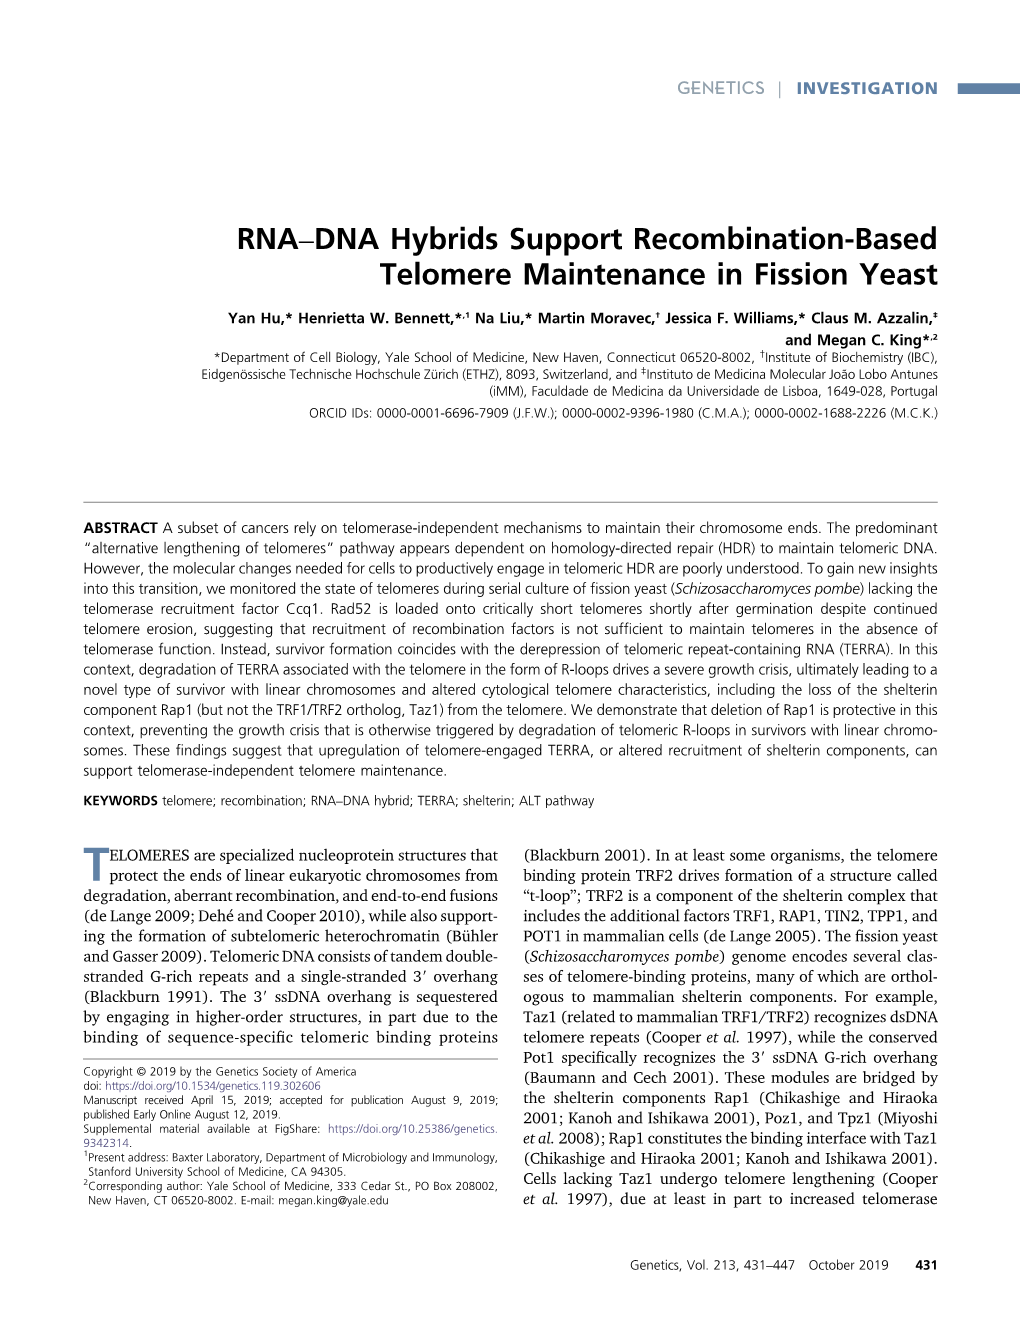 RNA–DNA Hybrids Support Recombination-Based Telomere Maintenance in Fission Yeast